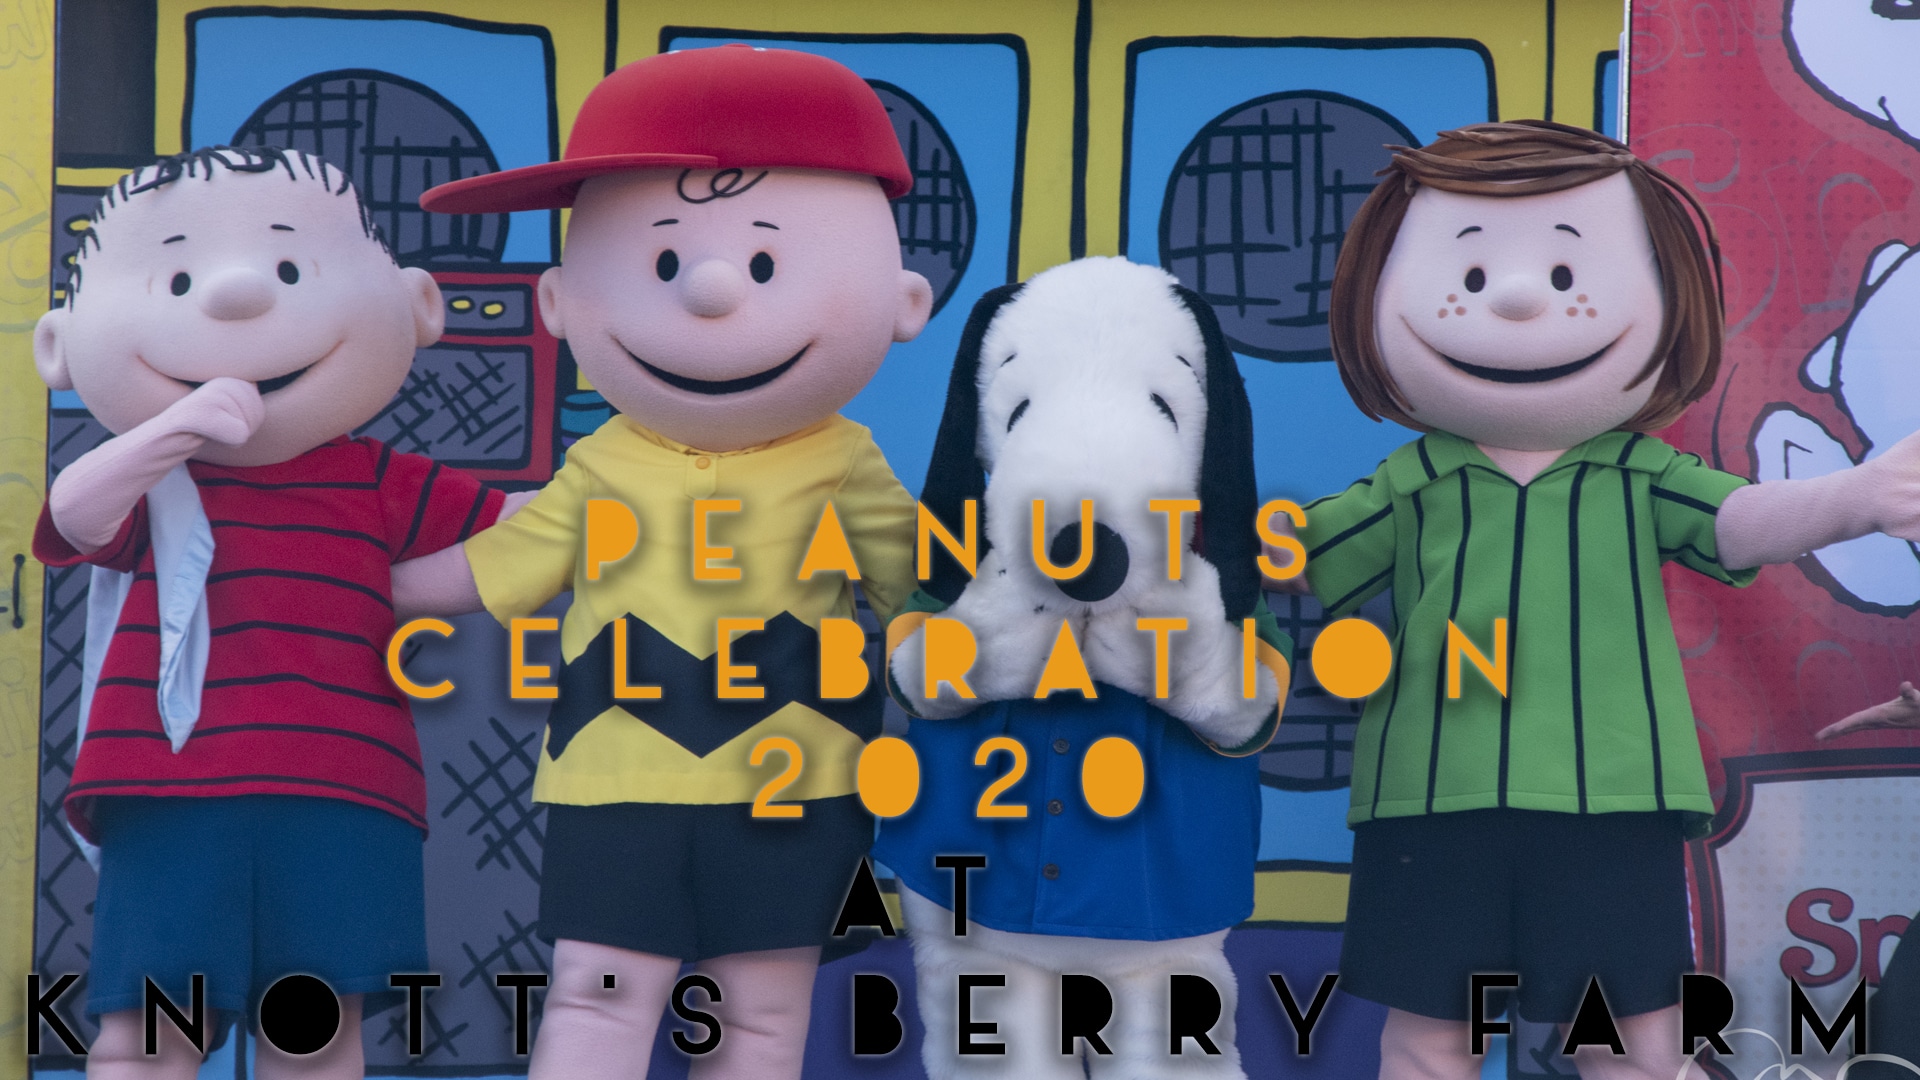 Peanuts Celebration 2020 at Knott’s Berry Farm Brings Great Family Fun and Snoopy